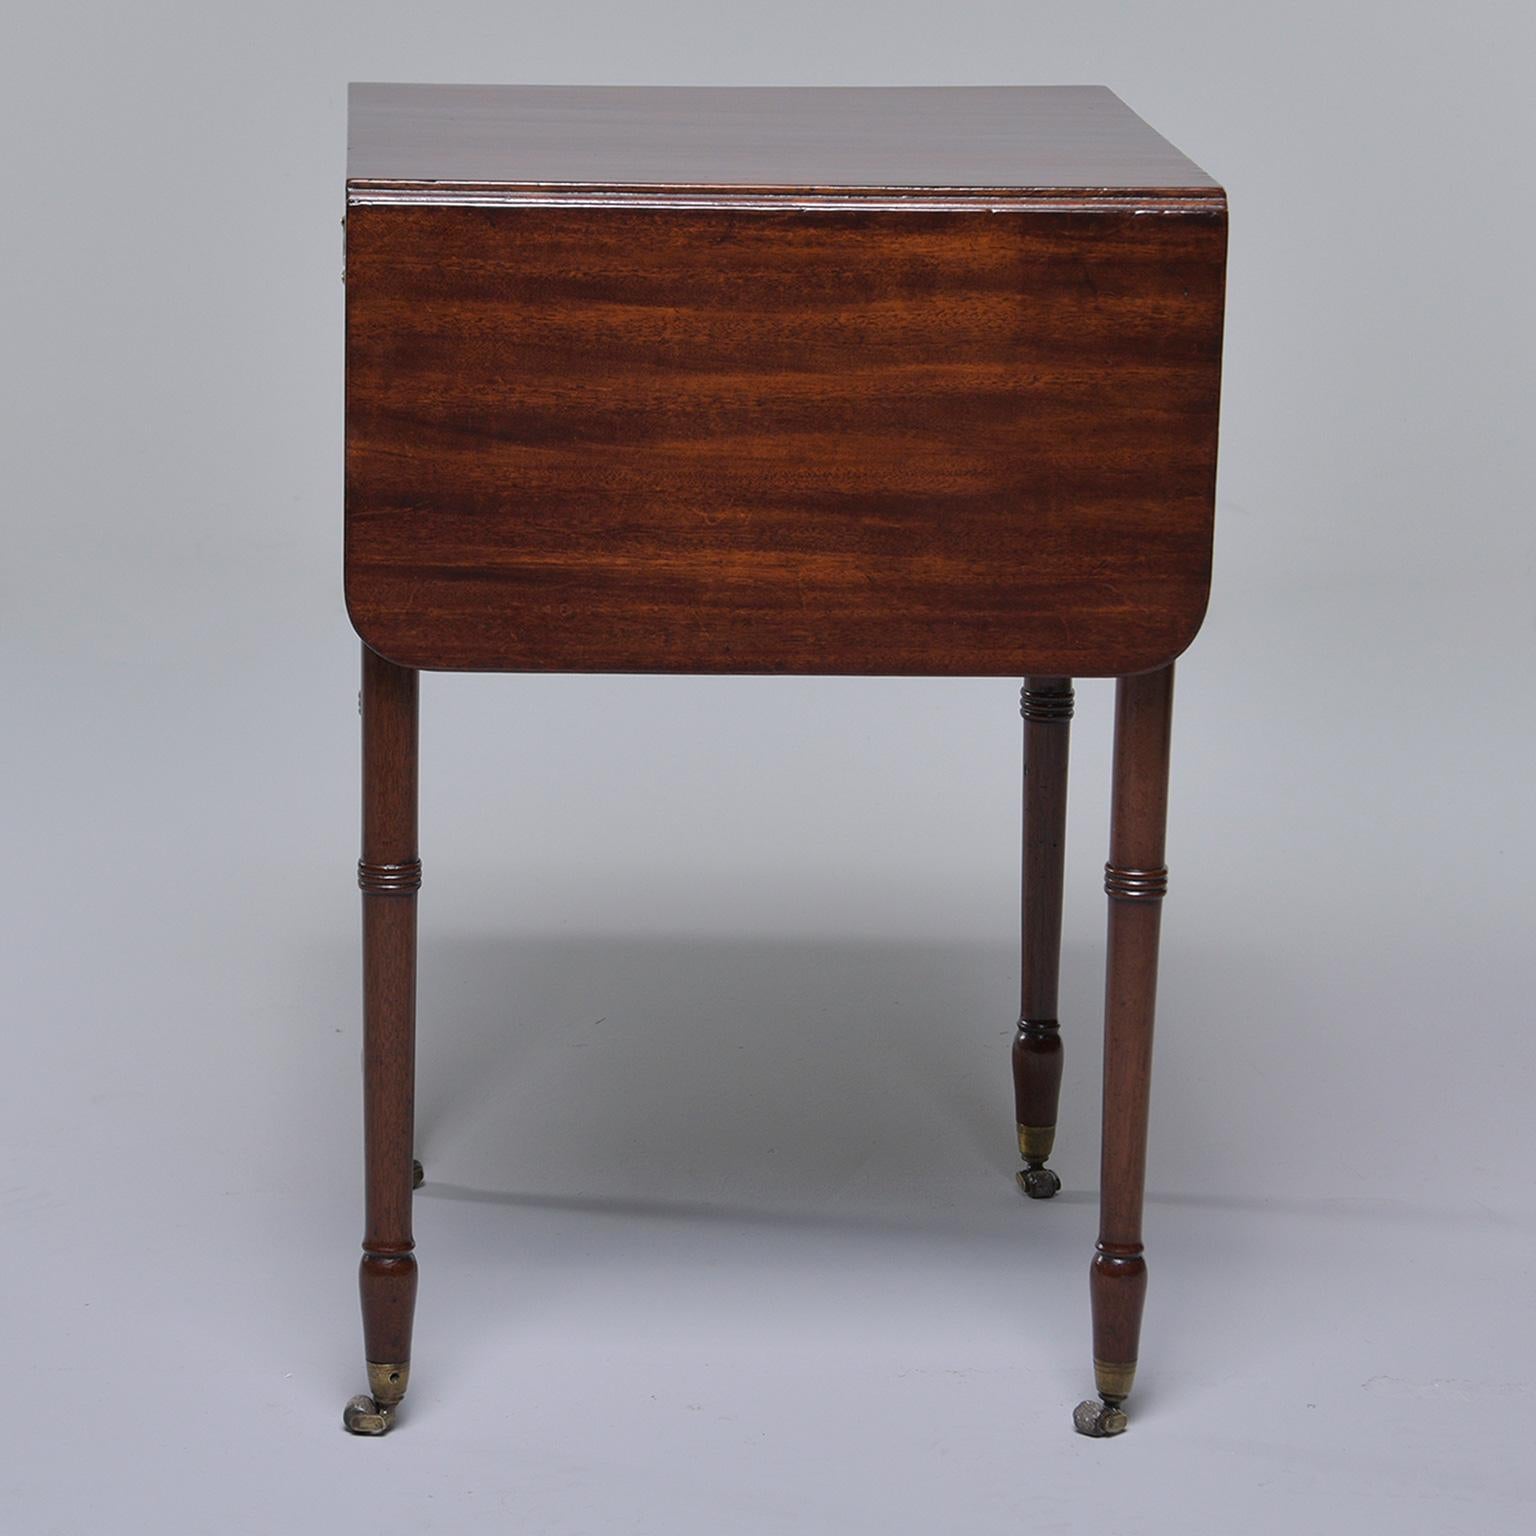 English mahogany Pembroke style table features turned legs and original brass casters hardware, circa 1900s. There is a functioning drawer on one side and a faux drawer with drawer front and hardware on the other. Unknown maker. 

Width shown is